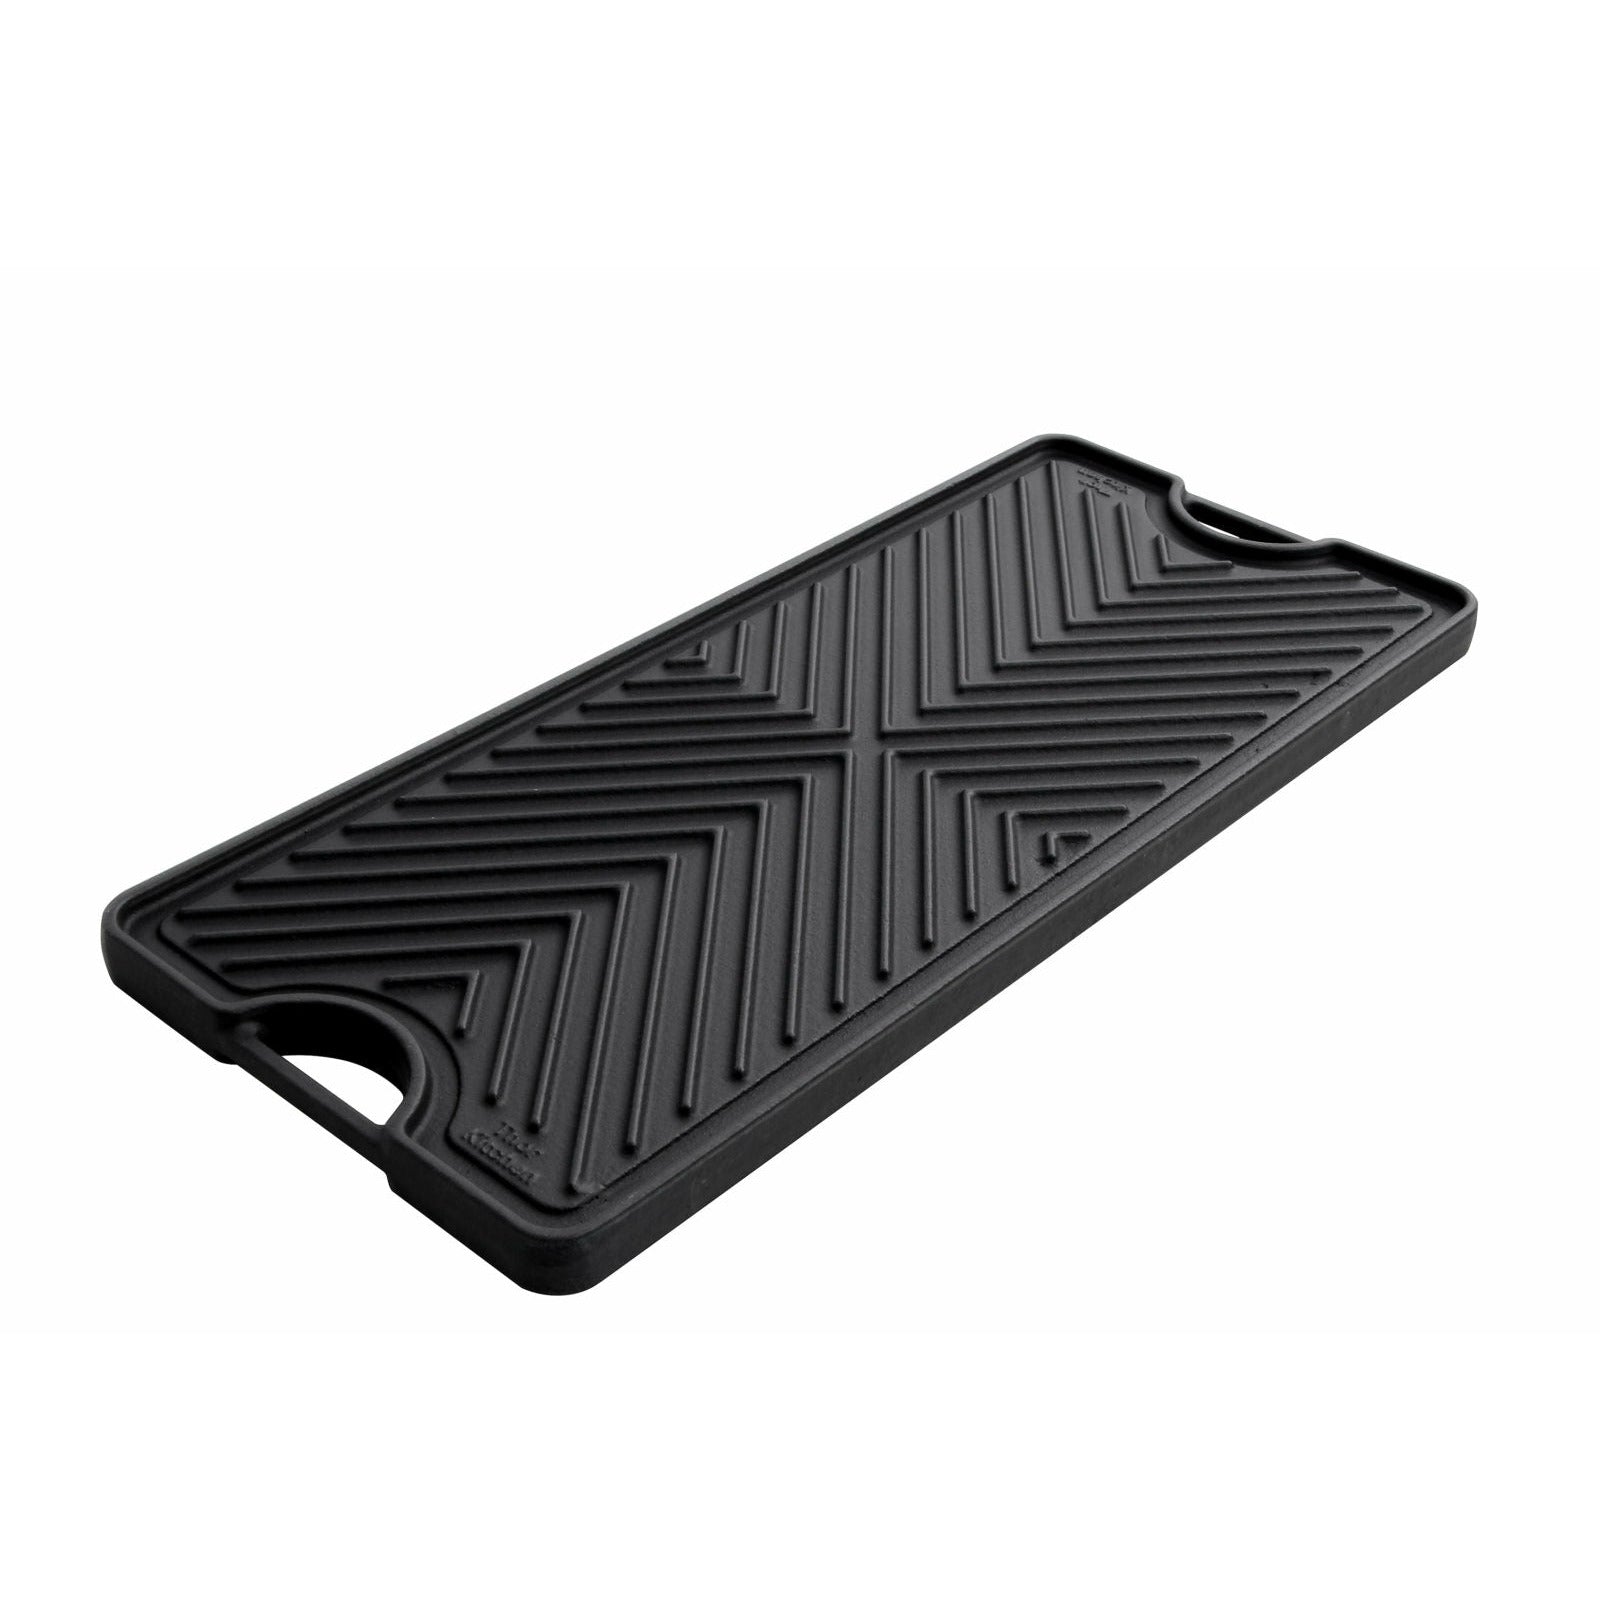 Thor Kitchen 21 1/2 Inch x 9 1/2 Inch REVERSIBLE CAST IRON GRIDDLE AND GRILL PLATE - RG1022